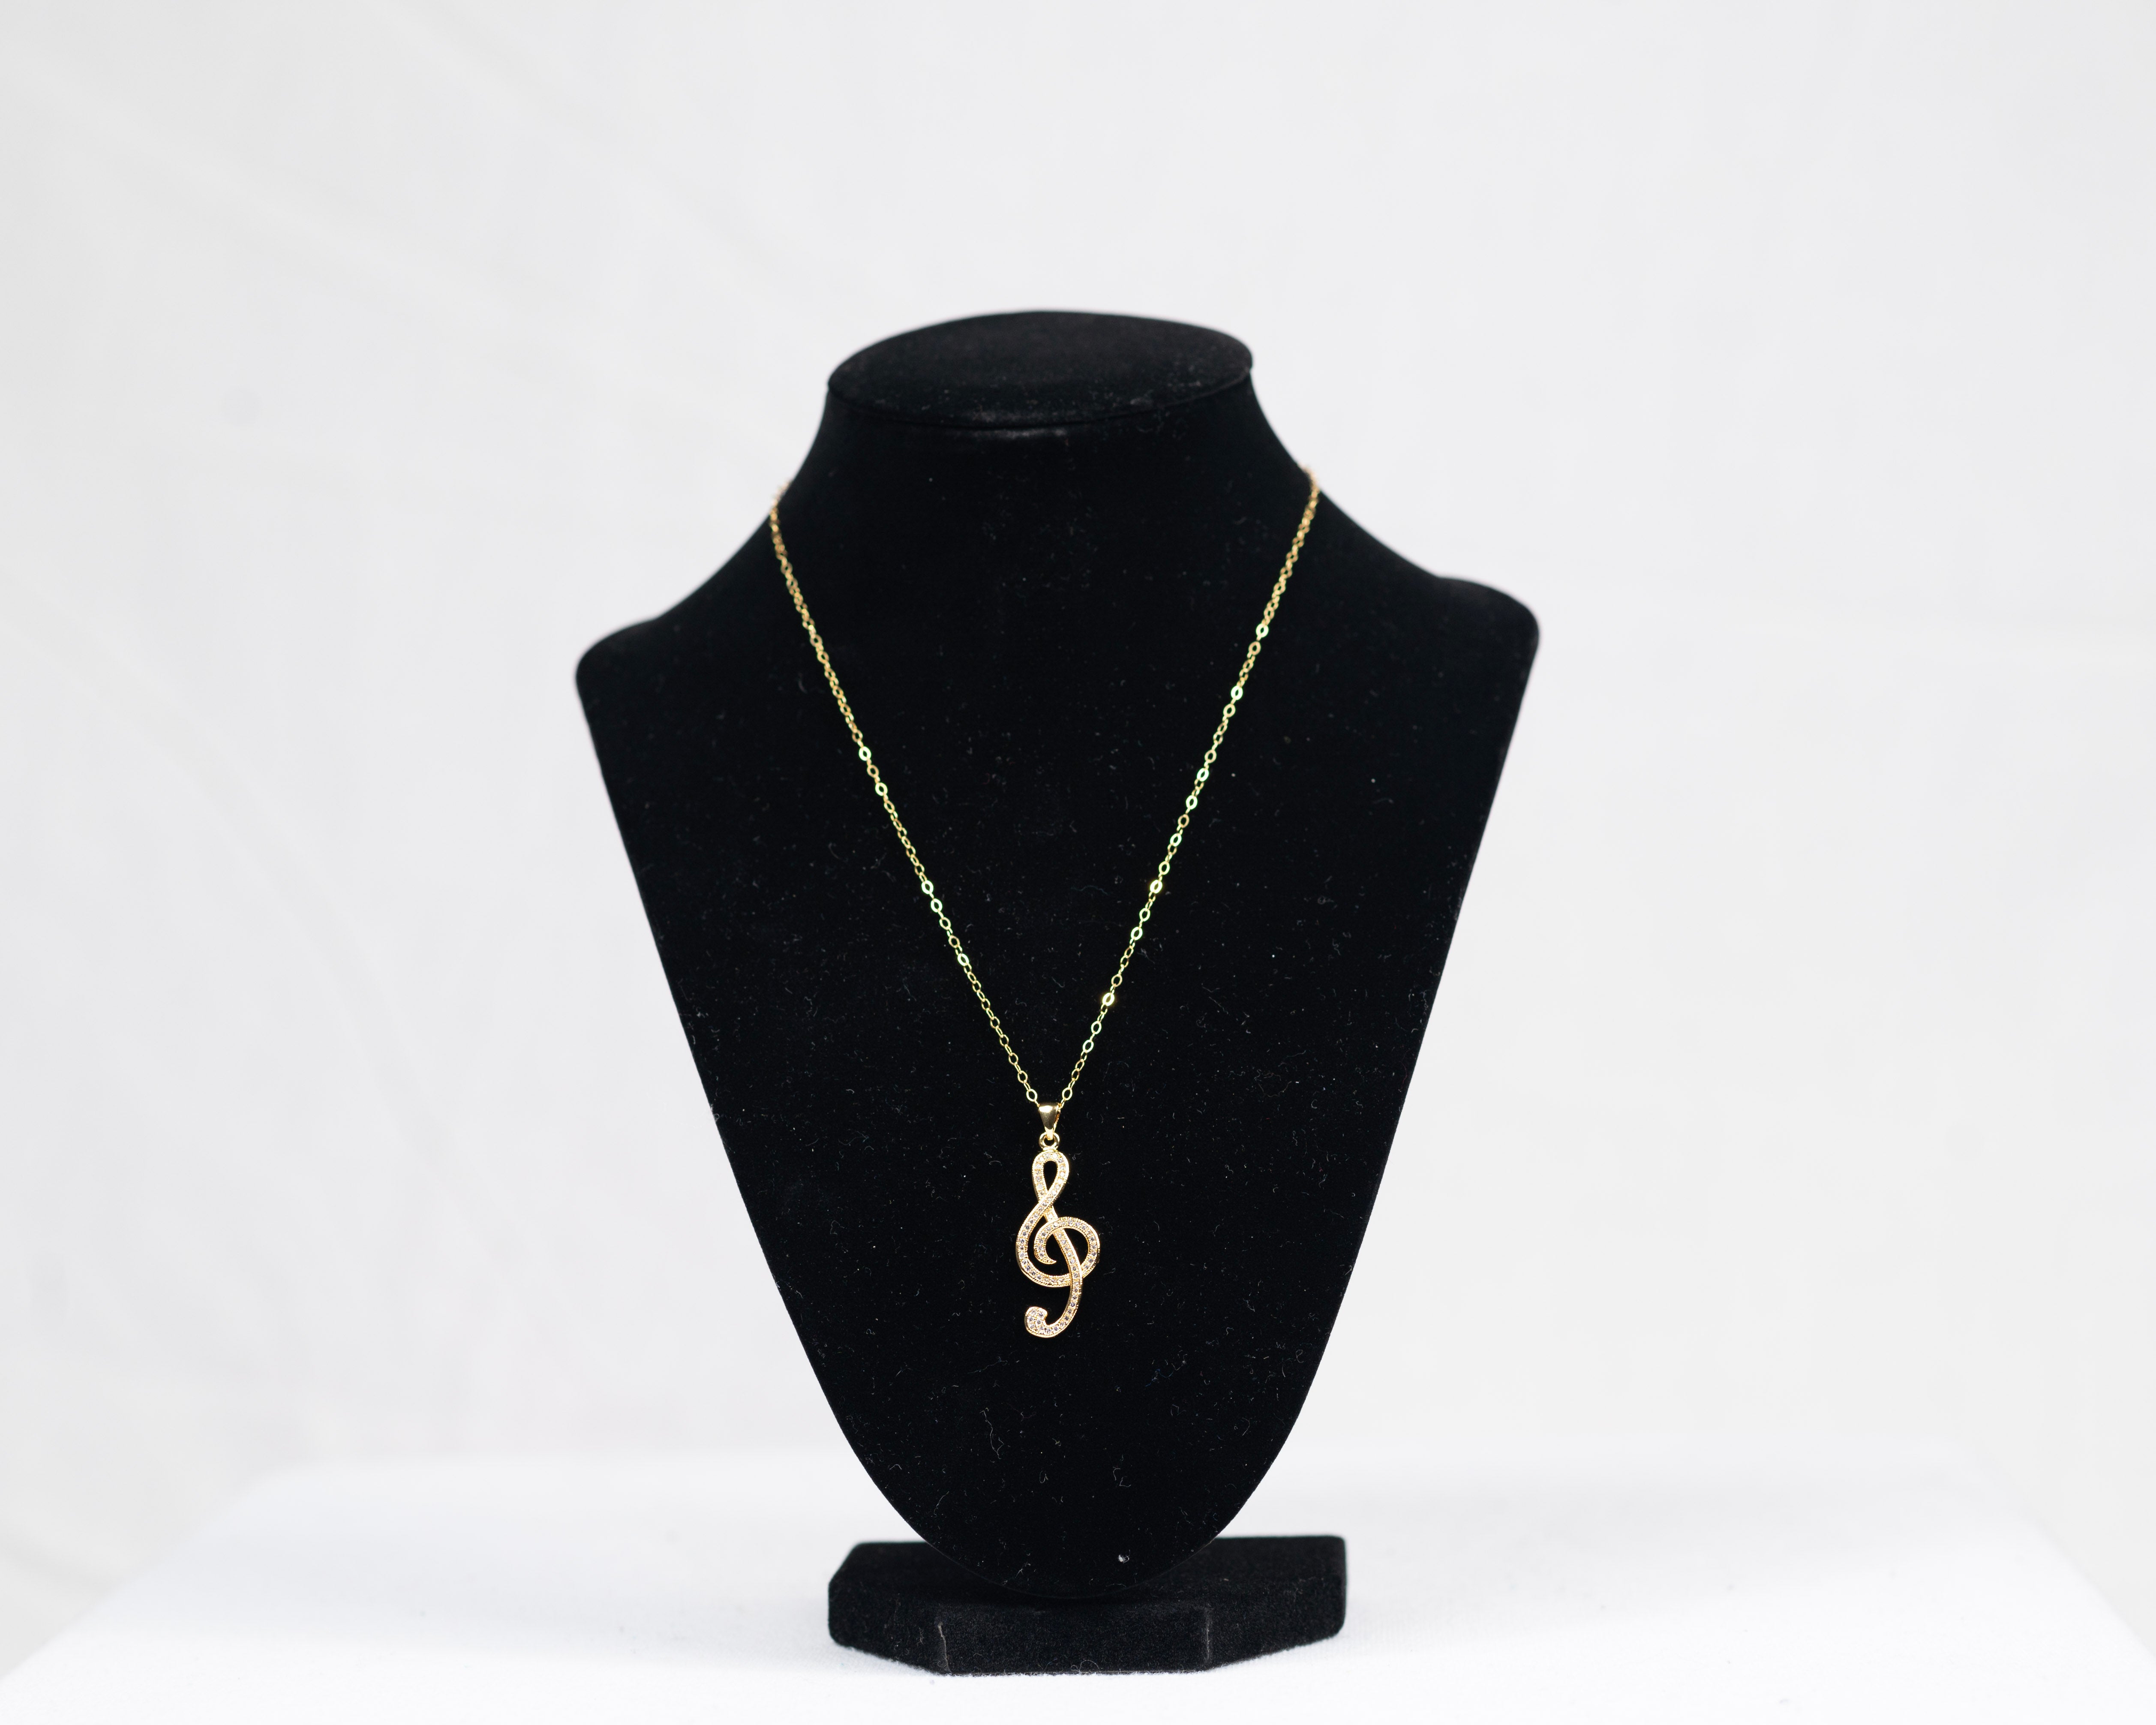 Gold Musical Note Charm Necklace